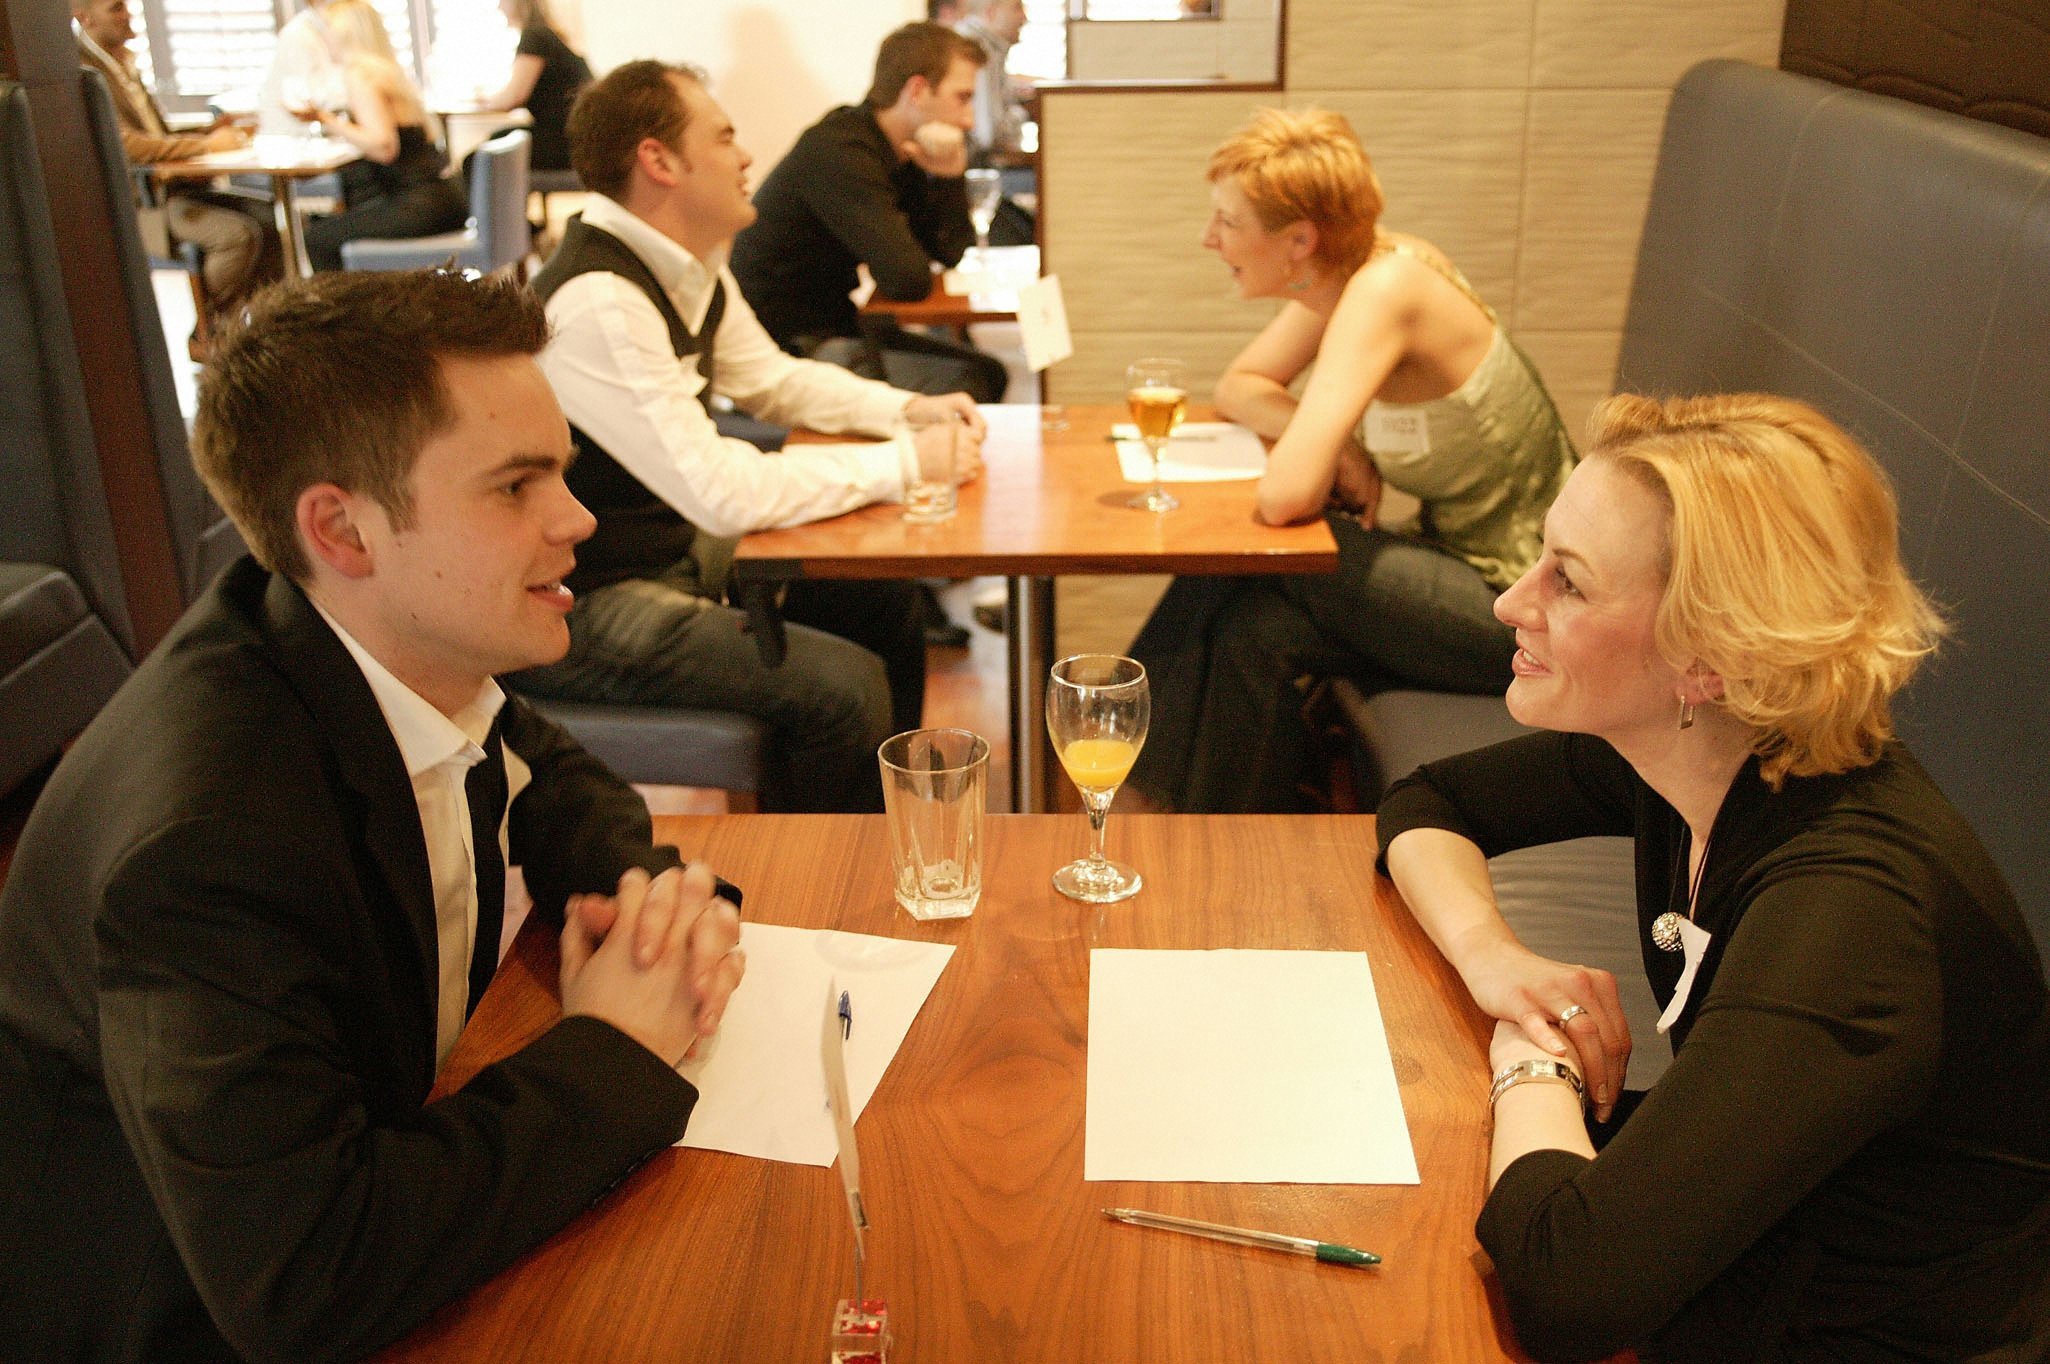 how to start a speed dating business